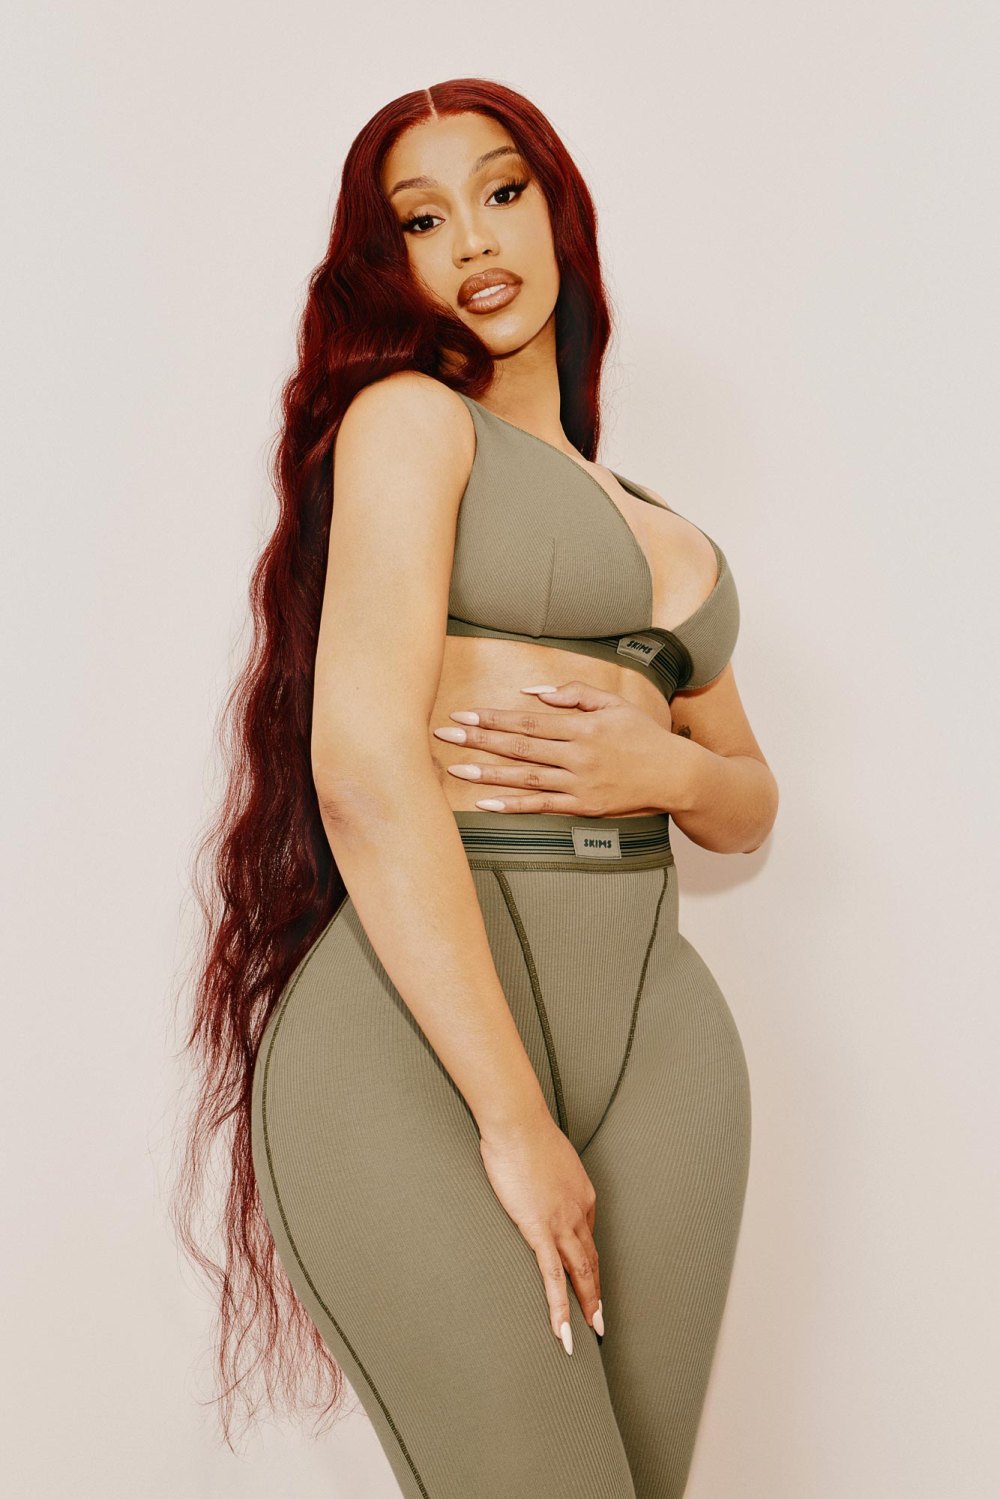 Cardi B Shows Us Her Skims in Sexy New Campaign 375